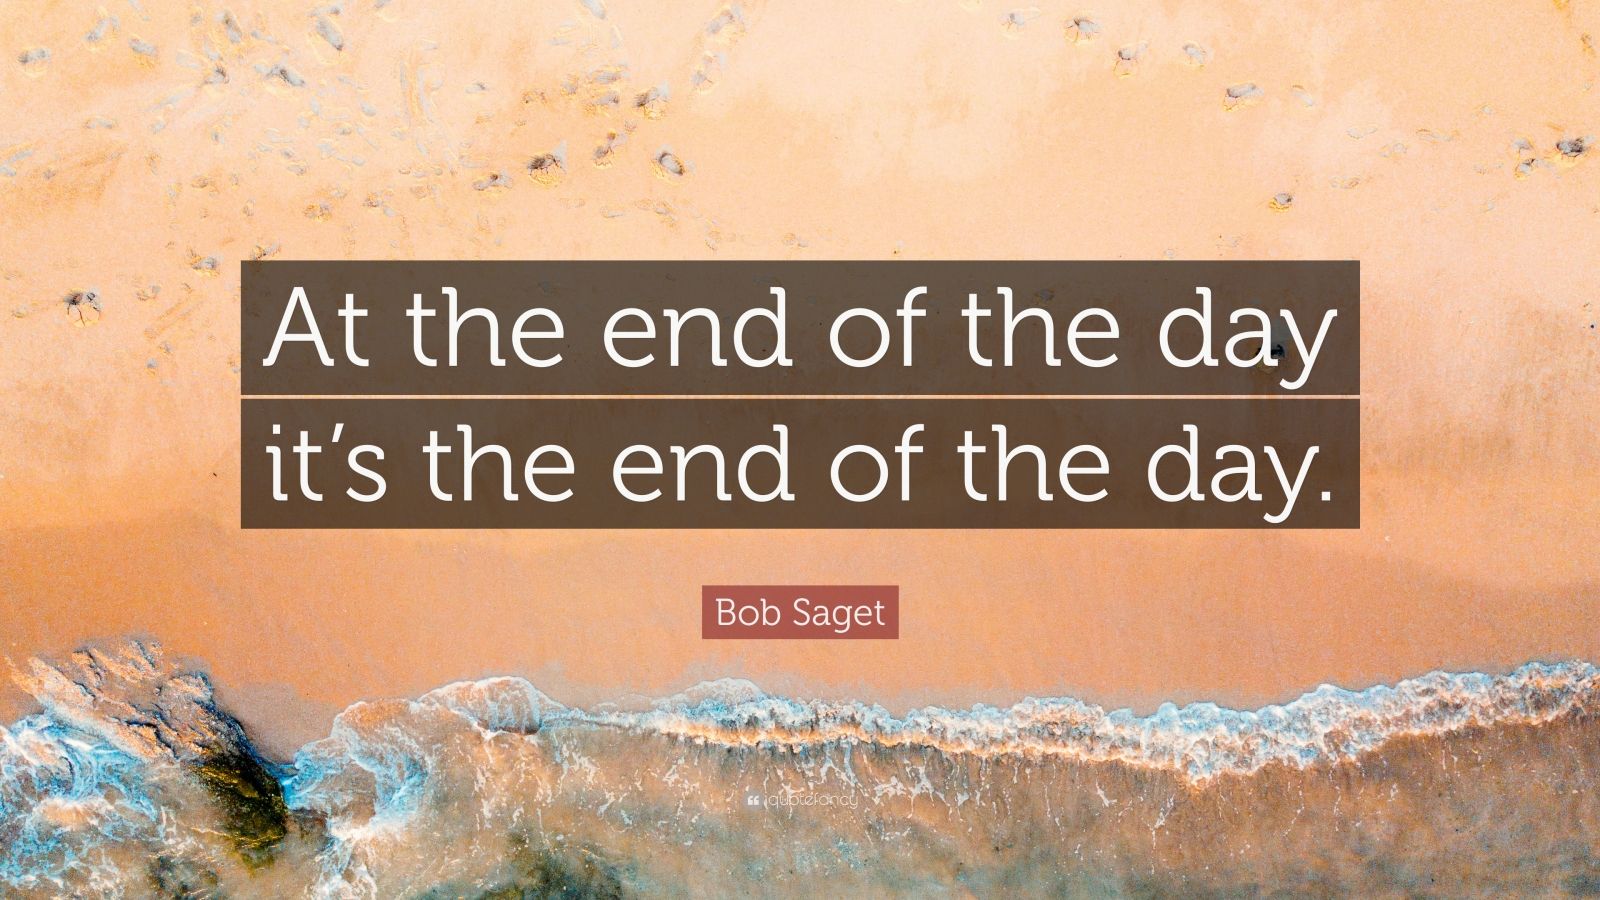 Bob Saget Quote: “At the end of the day it’s the end of the day.” (7